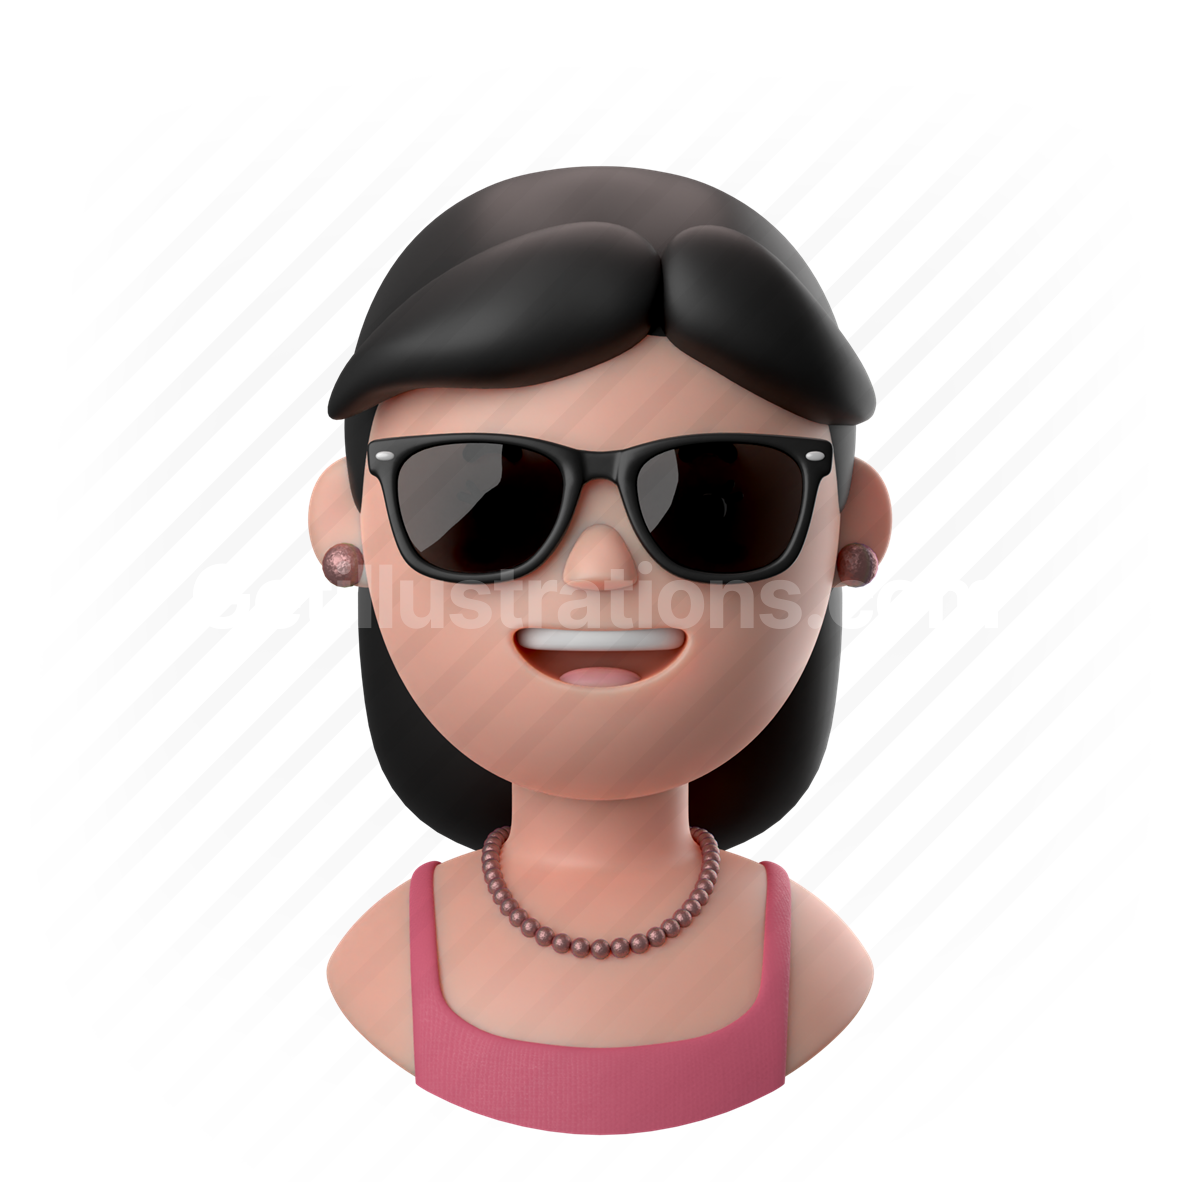 woman, female, person, people, sunglasses, earrings, necklace, glasses